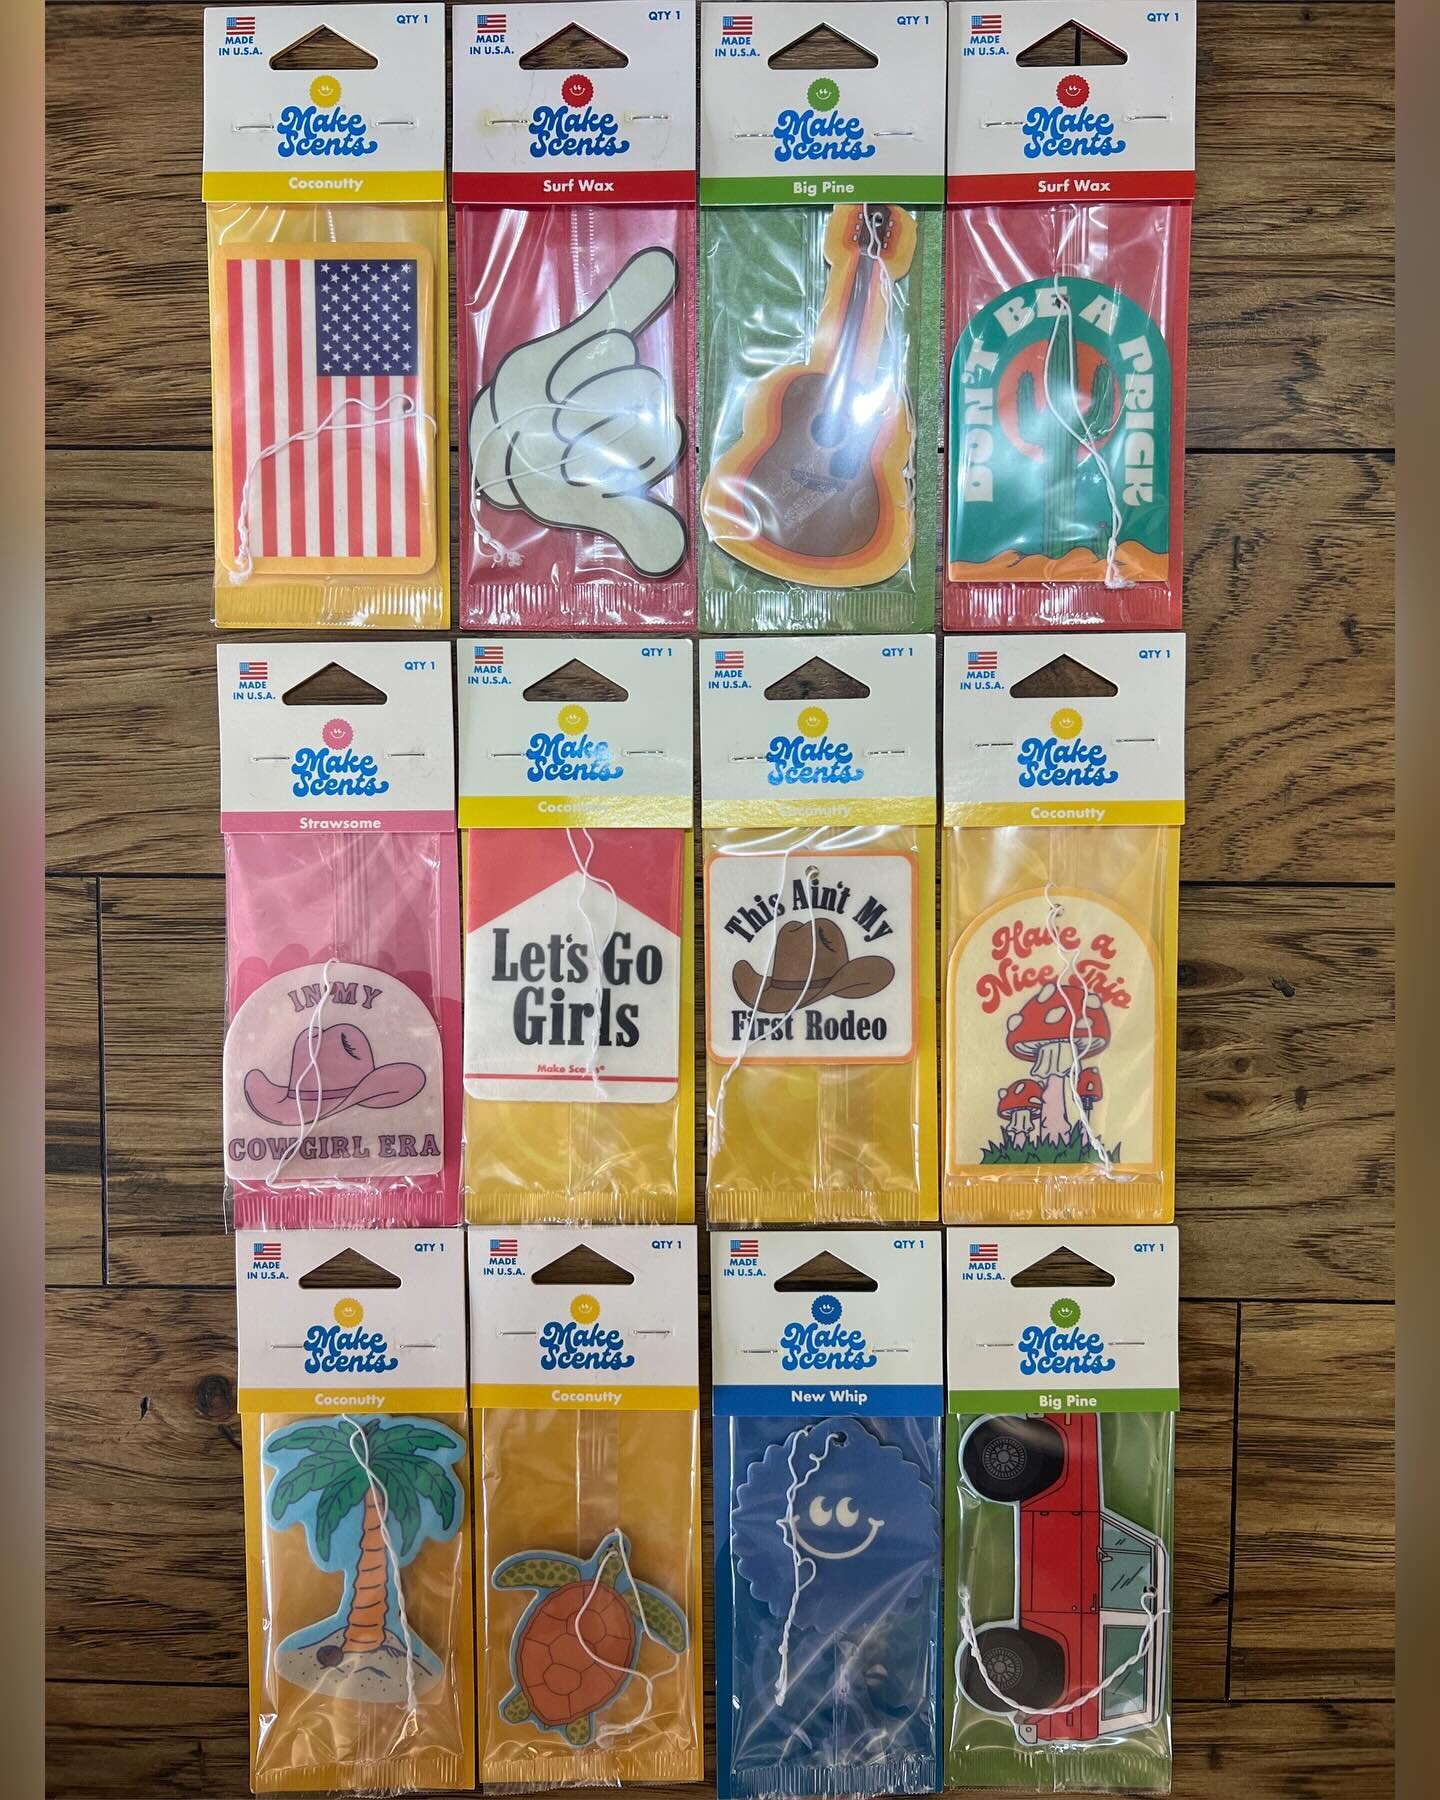 We had to order these because it only &ldquo;Make Scents&rdquo;! Come by and check out our new edition to the shop! Which one is going to be hanging in your car next? #makescents #shoplocal #surfconnection